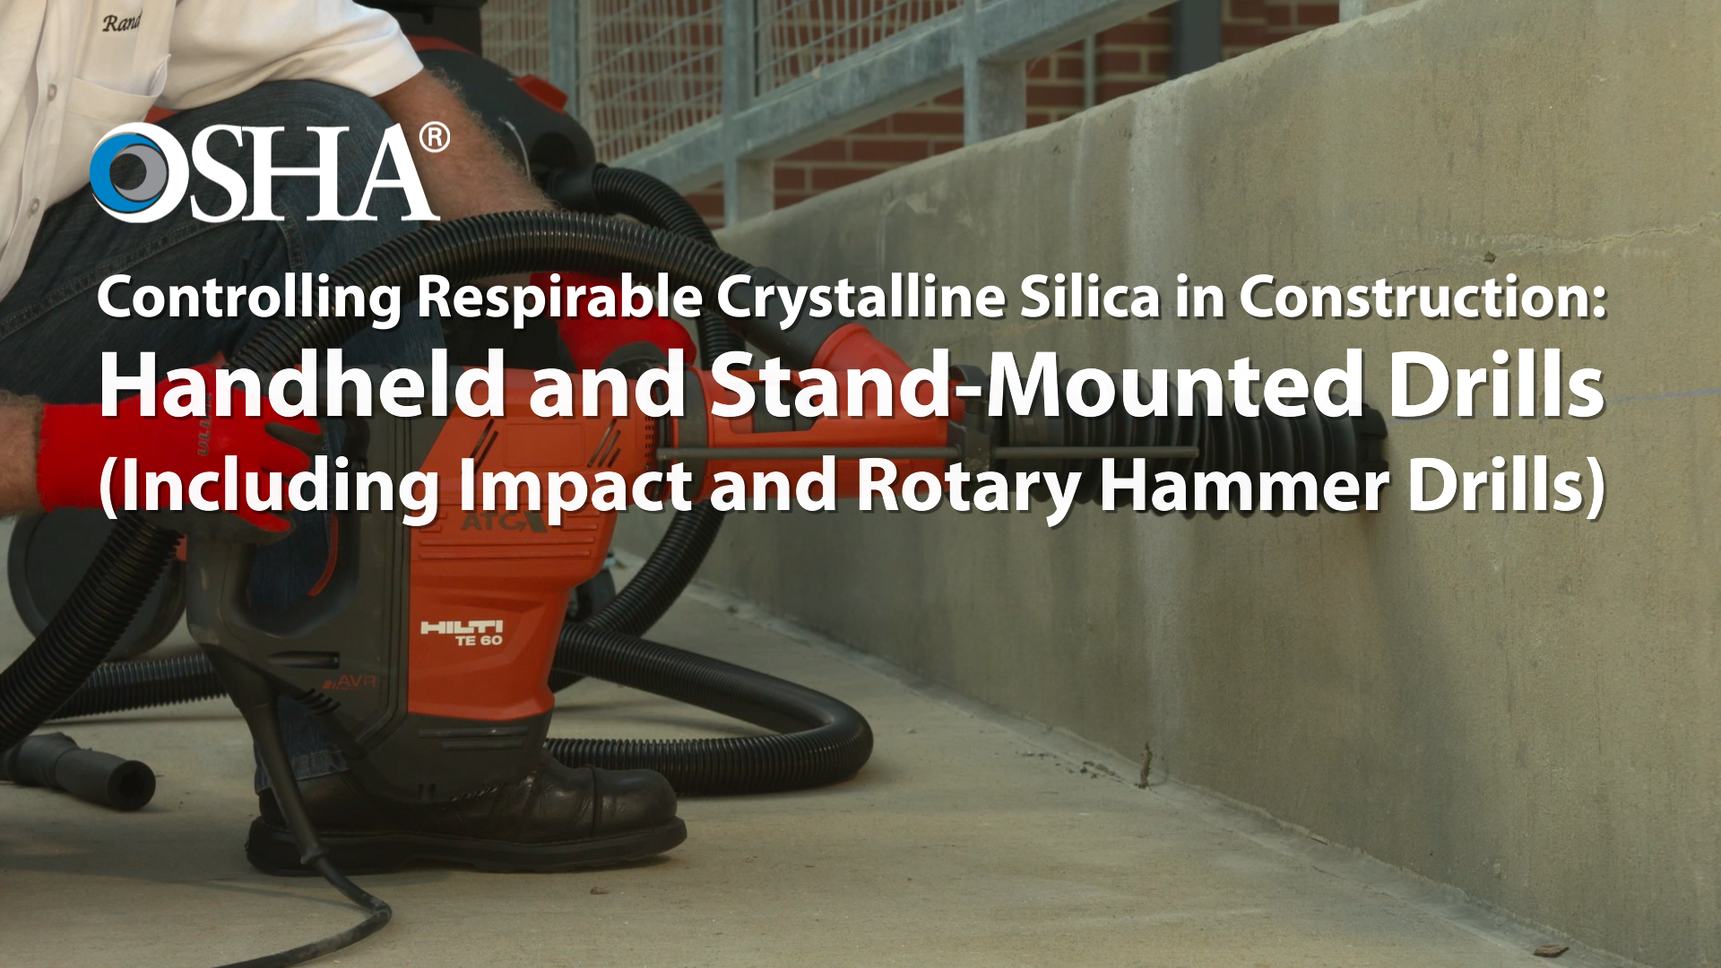 Controlling Respirable Crystalline Silica: Handheld and Stand-Mounted Drills